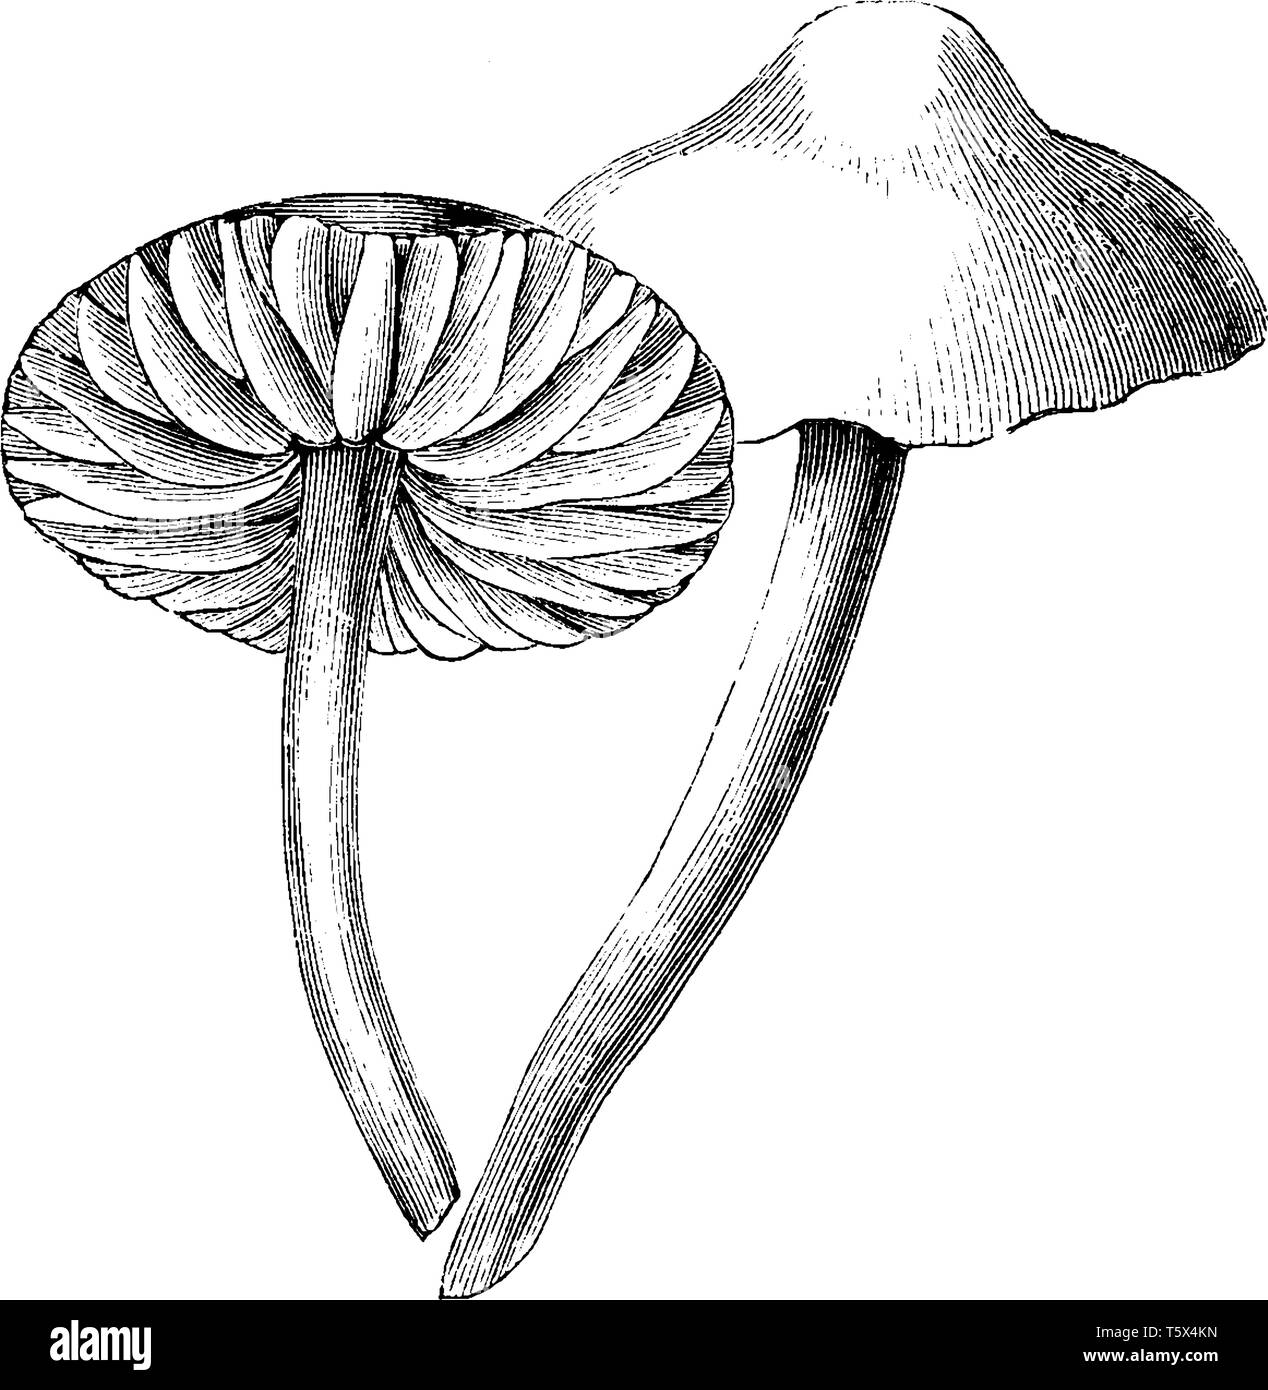 This pictures showing a marasmius oreades. The cap is a rounded, thick. Stems are long and thin, vintage line drawing or engraving illustration. Stock Vector